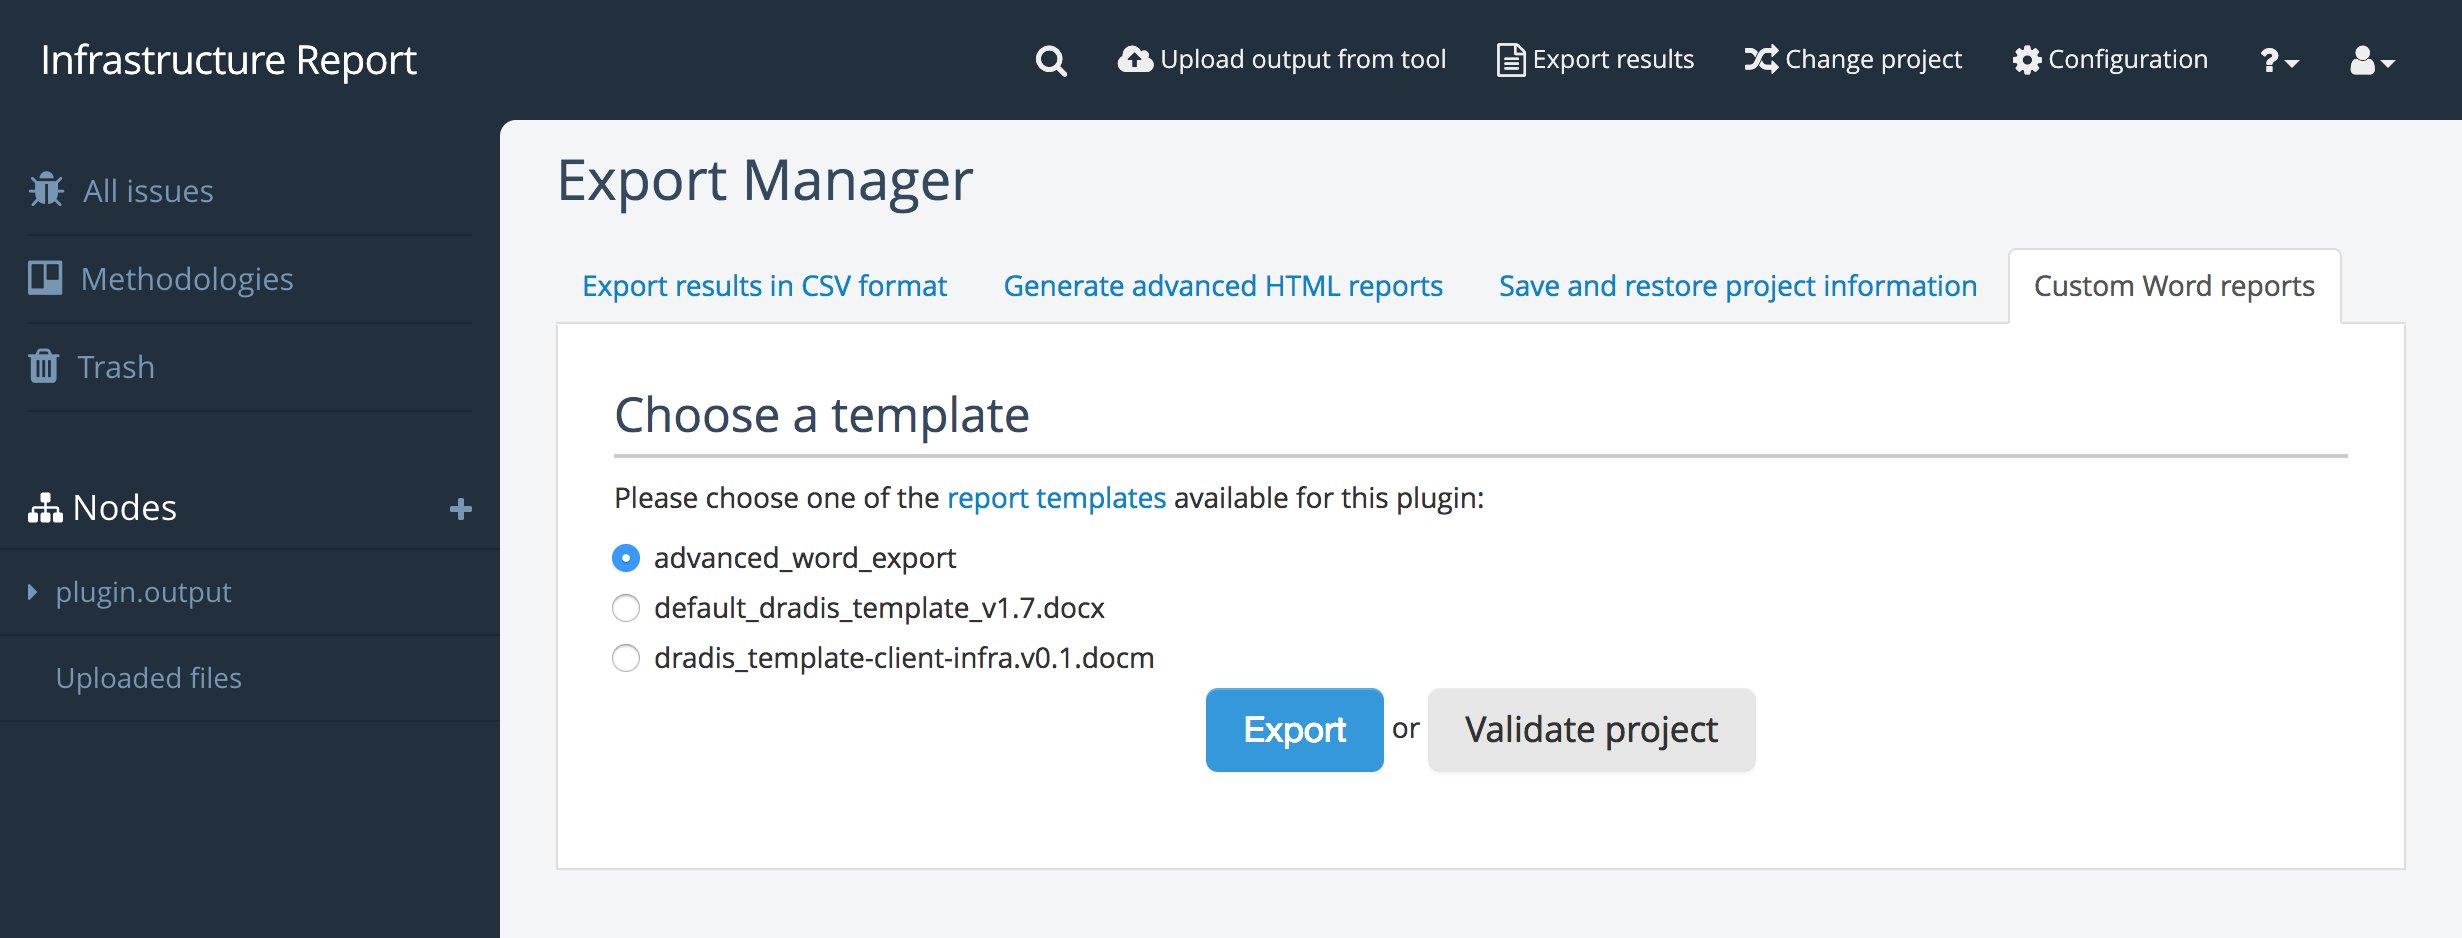 The Export Manager lets you choose the plugin and template before generating the report.